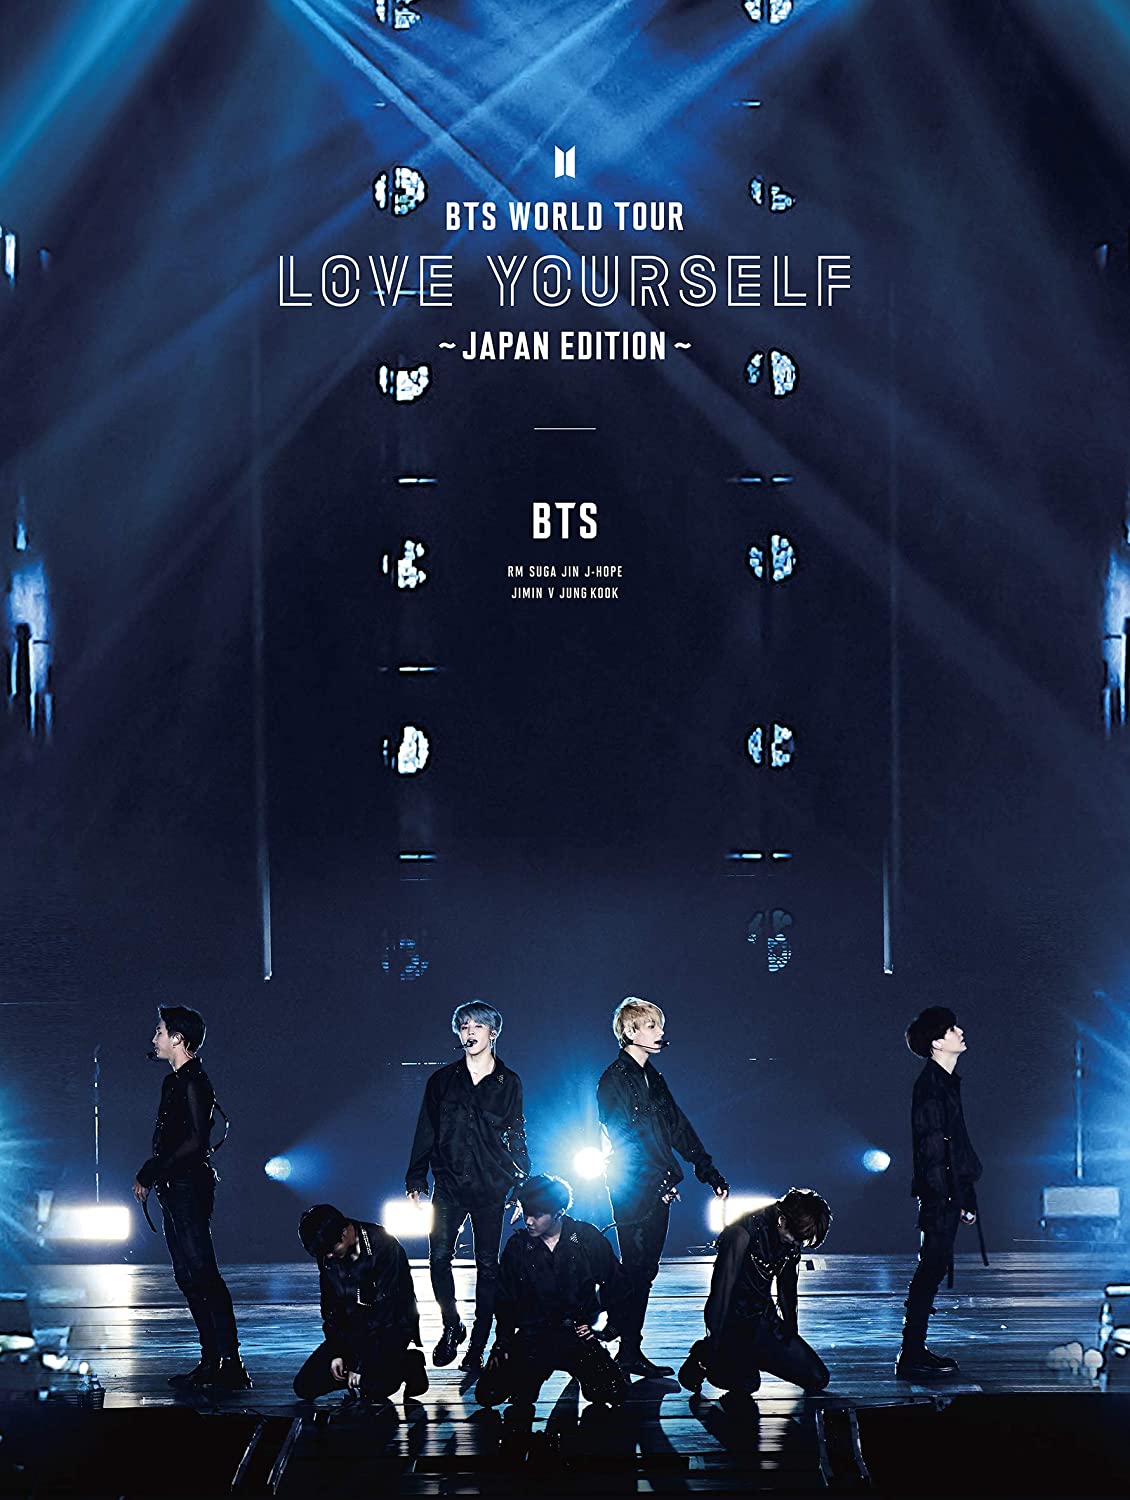 BTS WORLD TOUR 'LOVE YOURSELF' JAPAN Blu-ray (1st Press Limited 